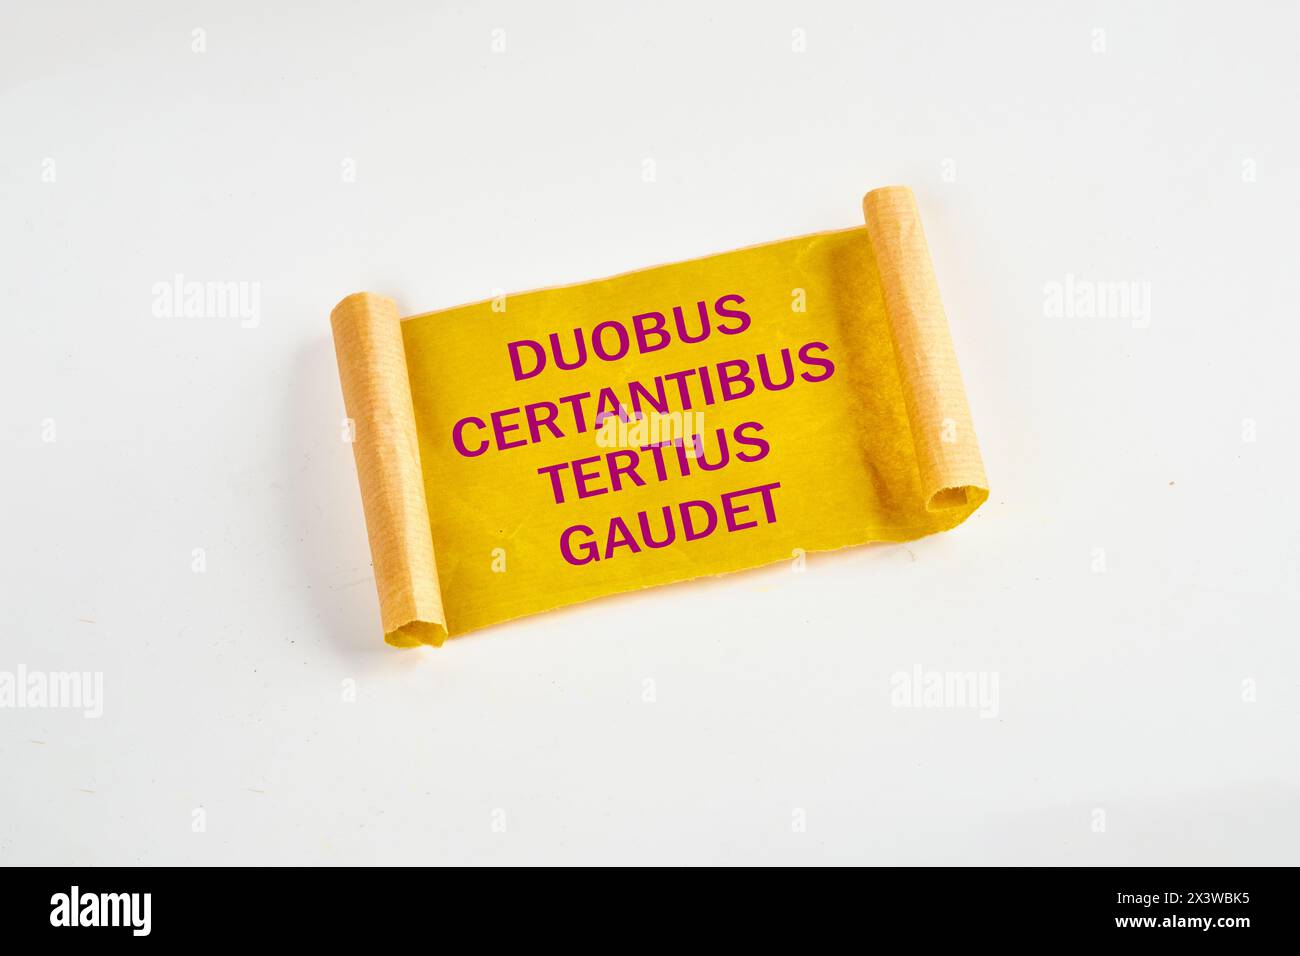 DUOBUS CERTANTIBUS TERTIUS GAUDET it means in Latin While two argue, the third rejoices. on yellow torn paper Stock Photo